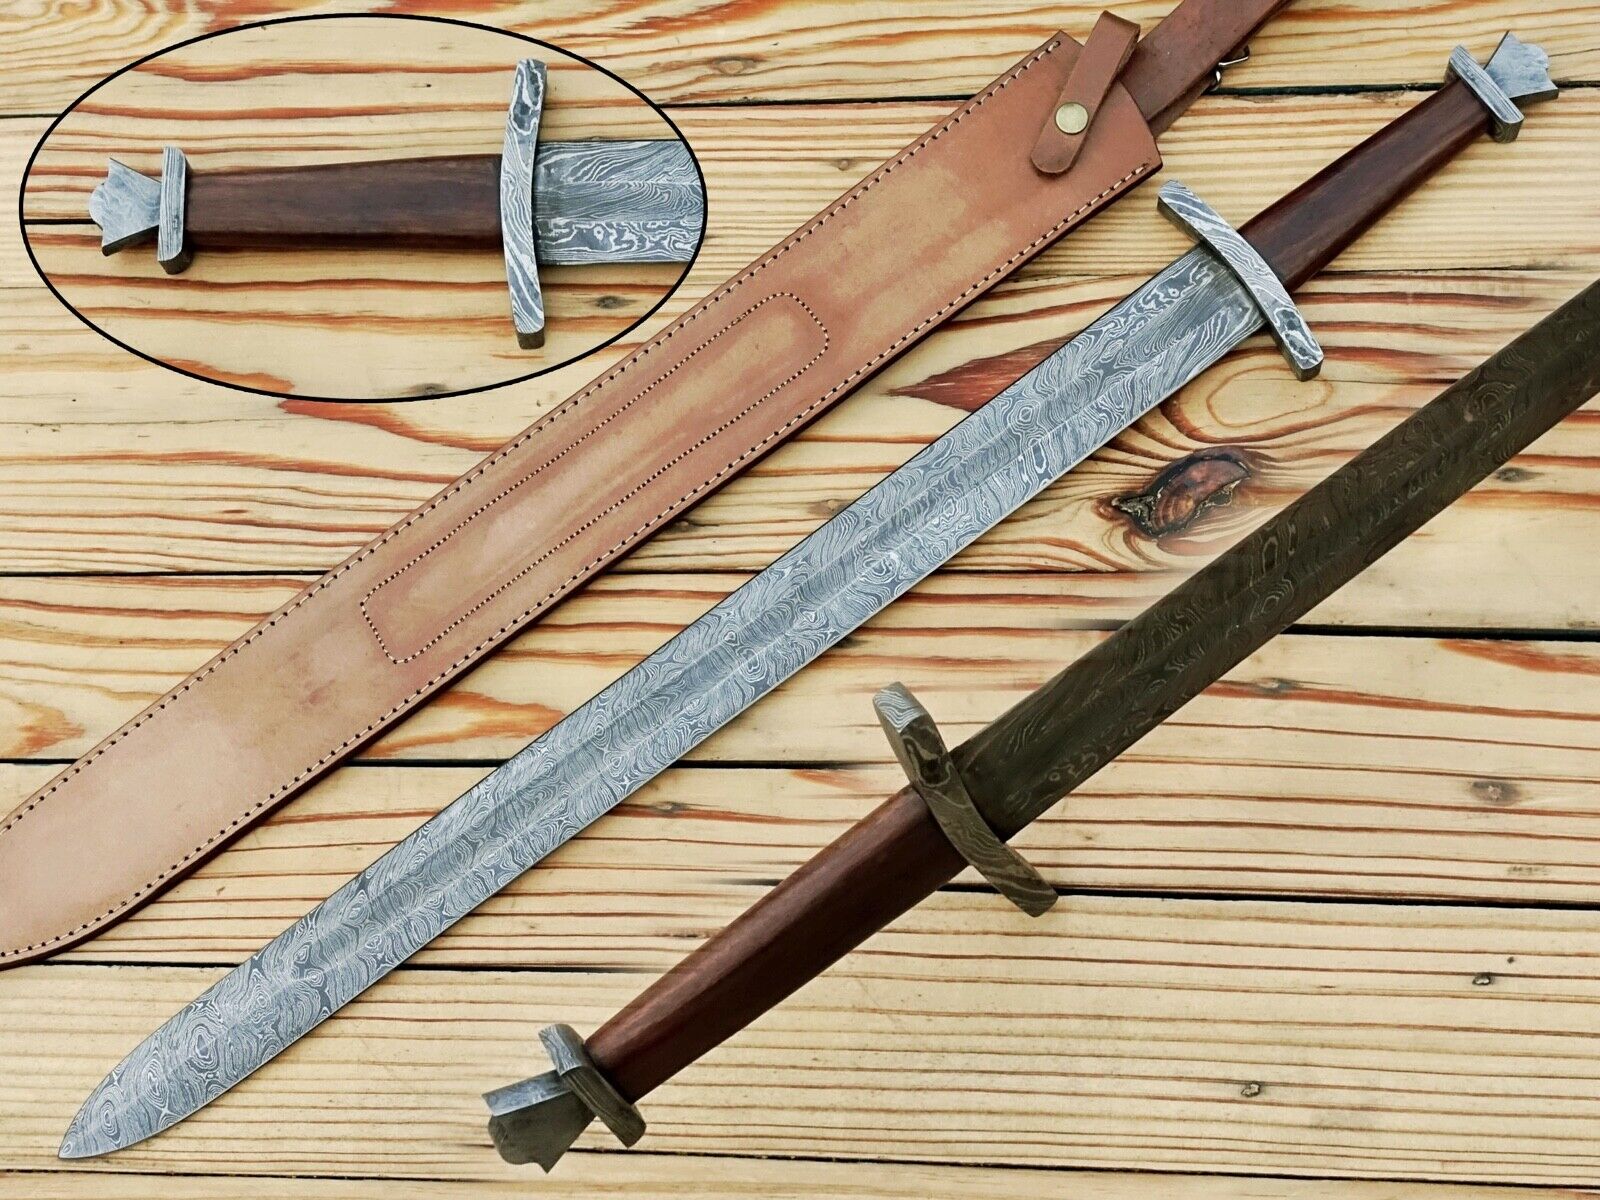 Handforged Damascus Steel Viking Sword | Medieval Sword With Sheath | Functional